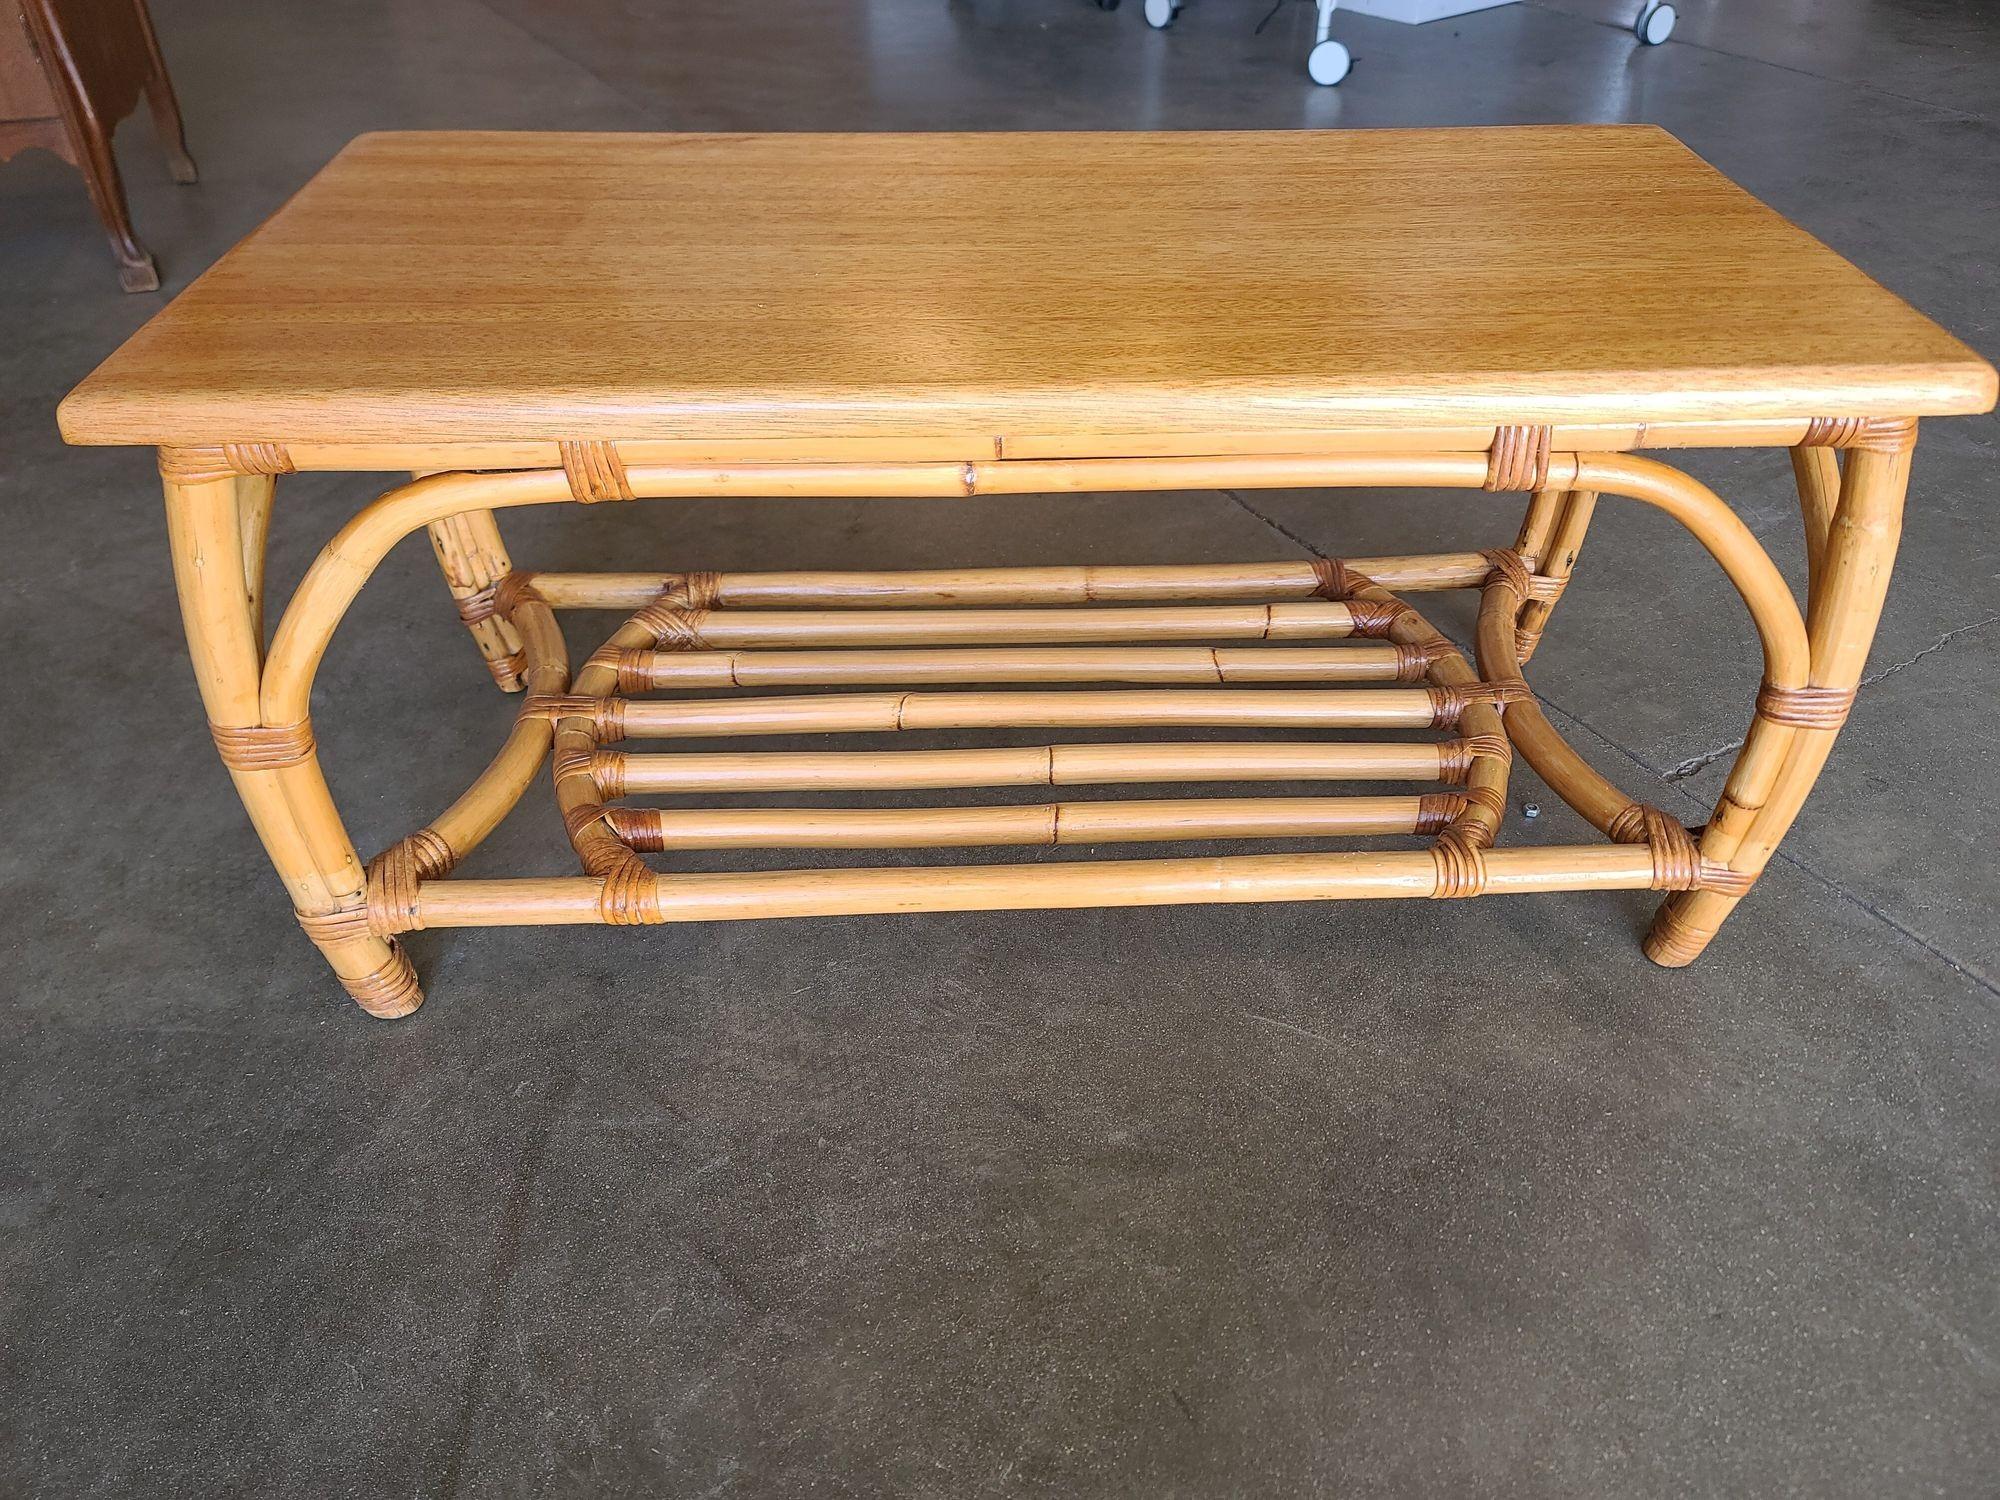 This piece is a vintage 1940s rattan coffee table with a wonderful bentwood base and stylized arches built-in. It also has a beautiful mahogany top. This table is sure to grab attention as a wonderful centerpiece in any room. Also available are a